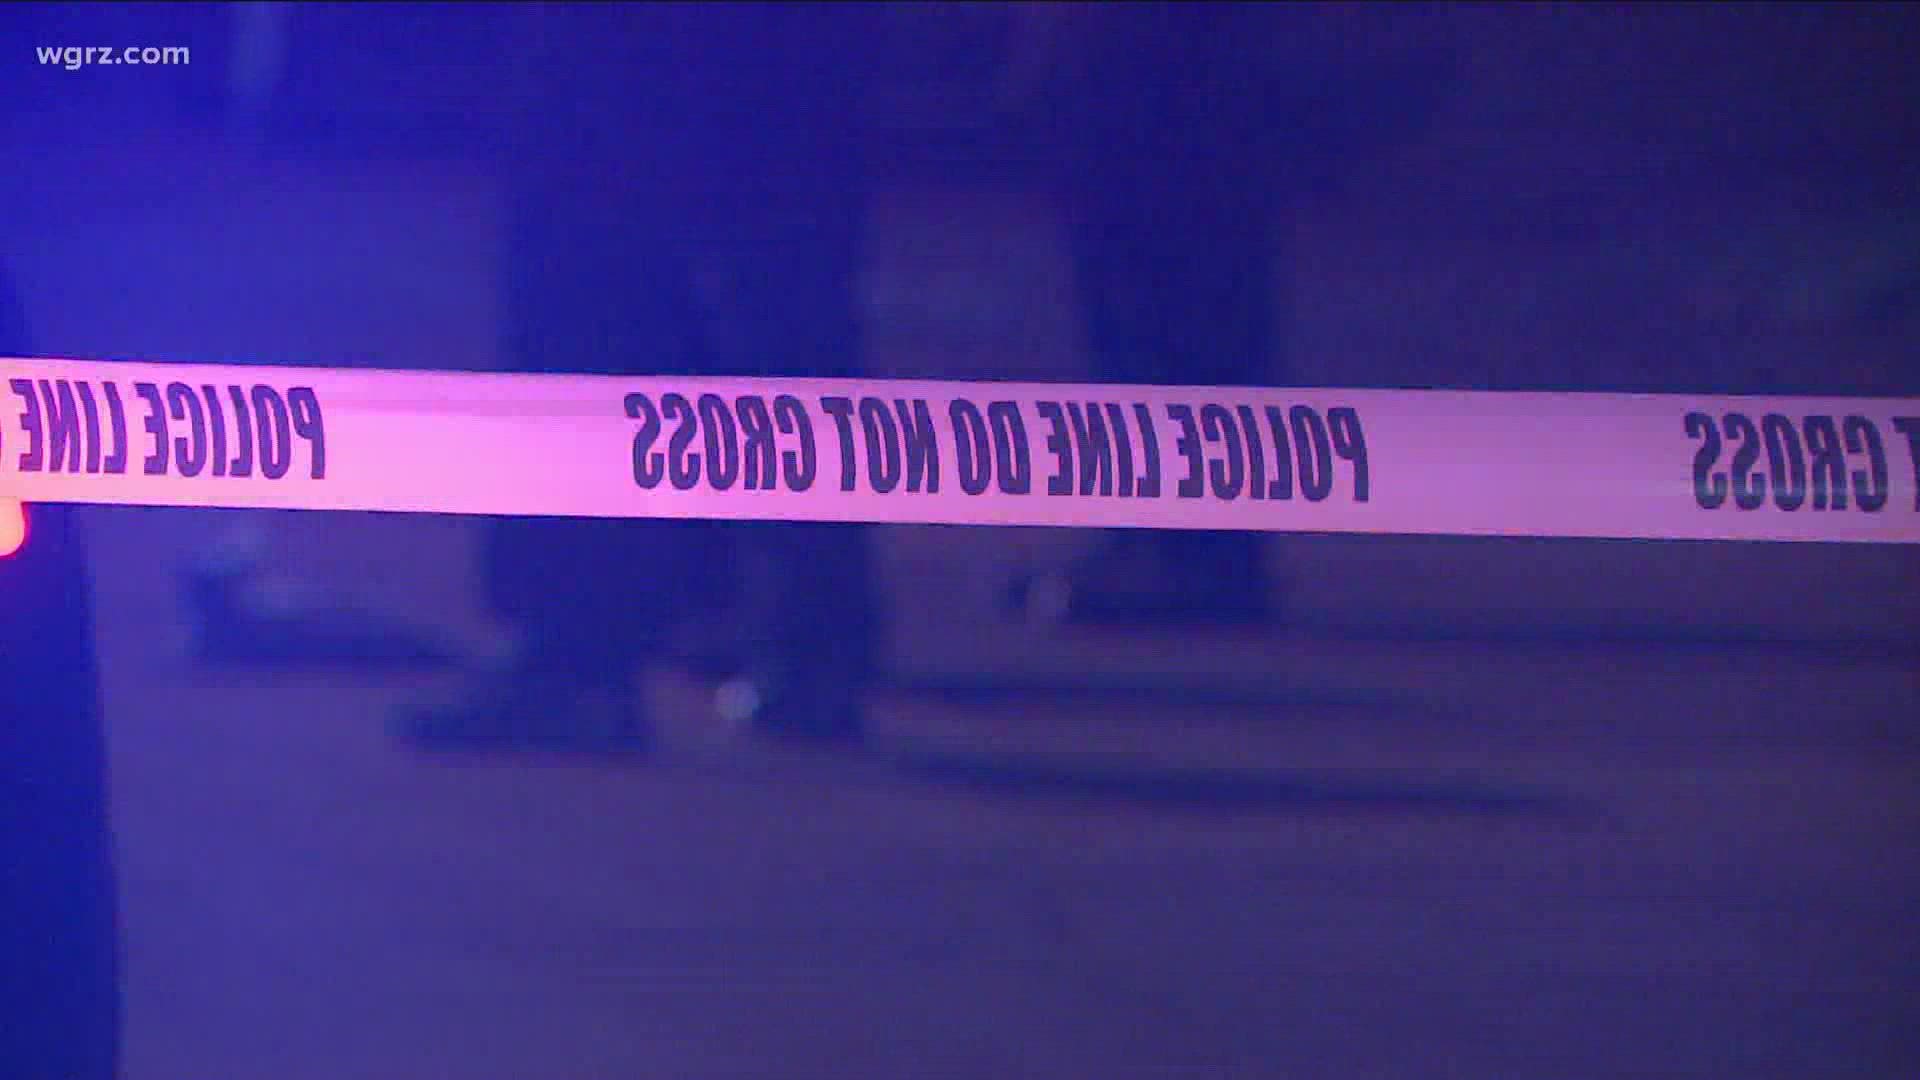 Buffalo police say one man was shot and killed early this morning. Officers were called out around three this morning and found a man dead inside a home.